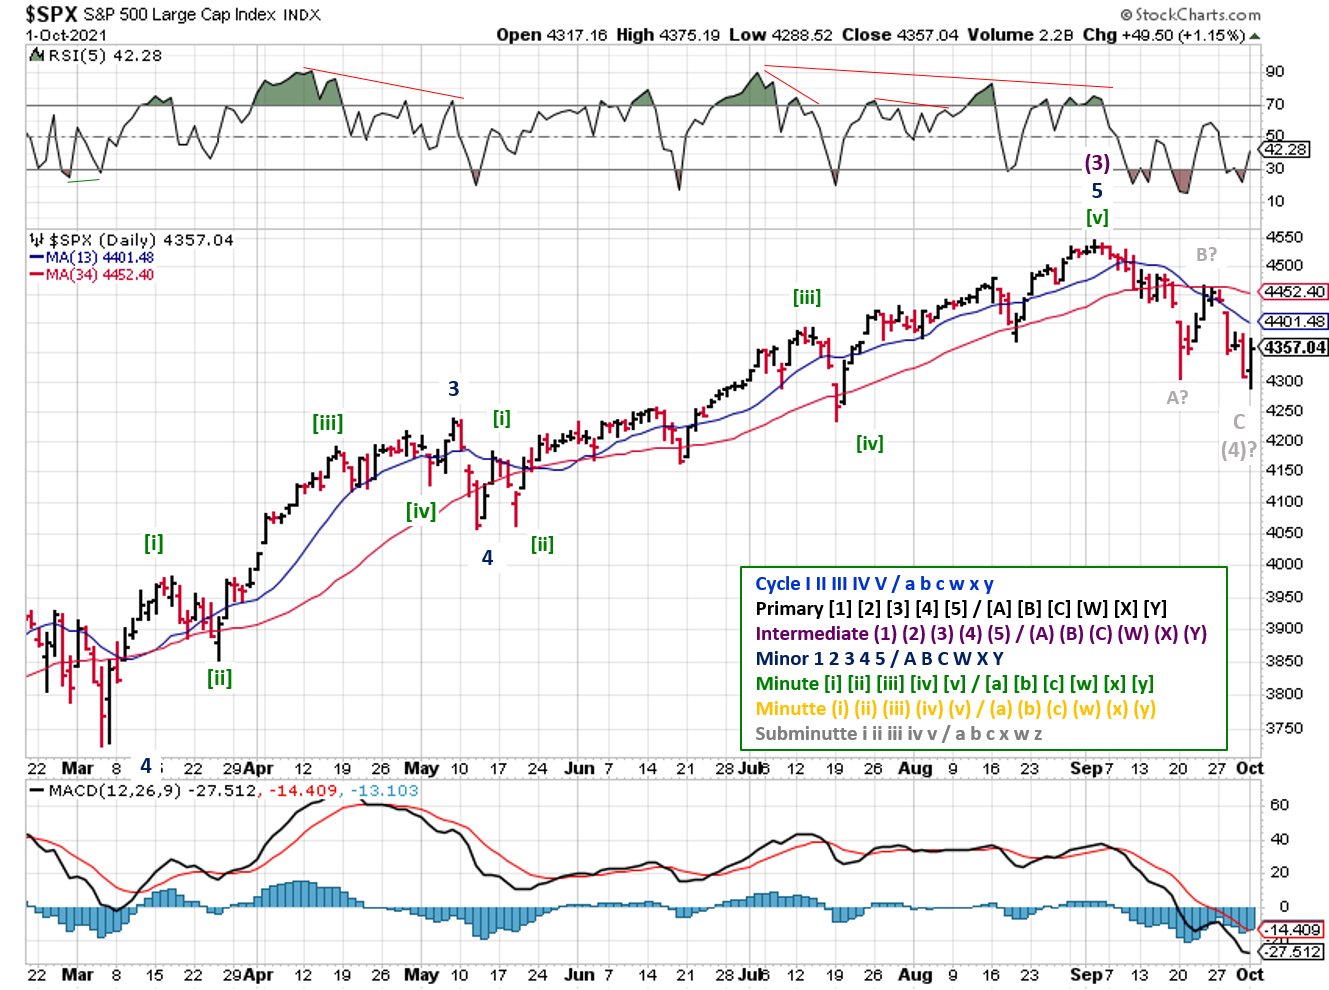 Technical analysis of daily SPX prices